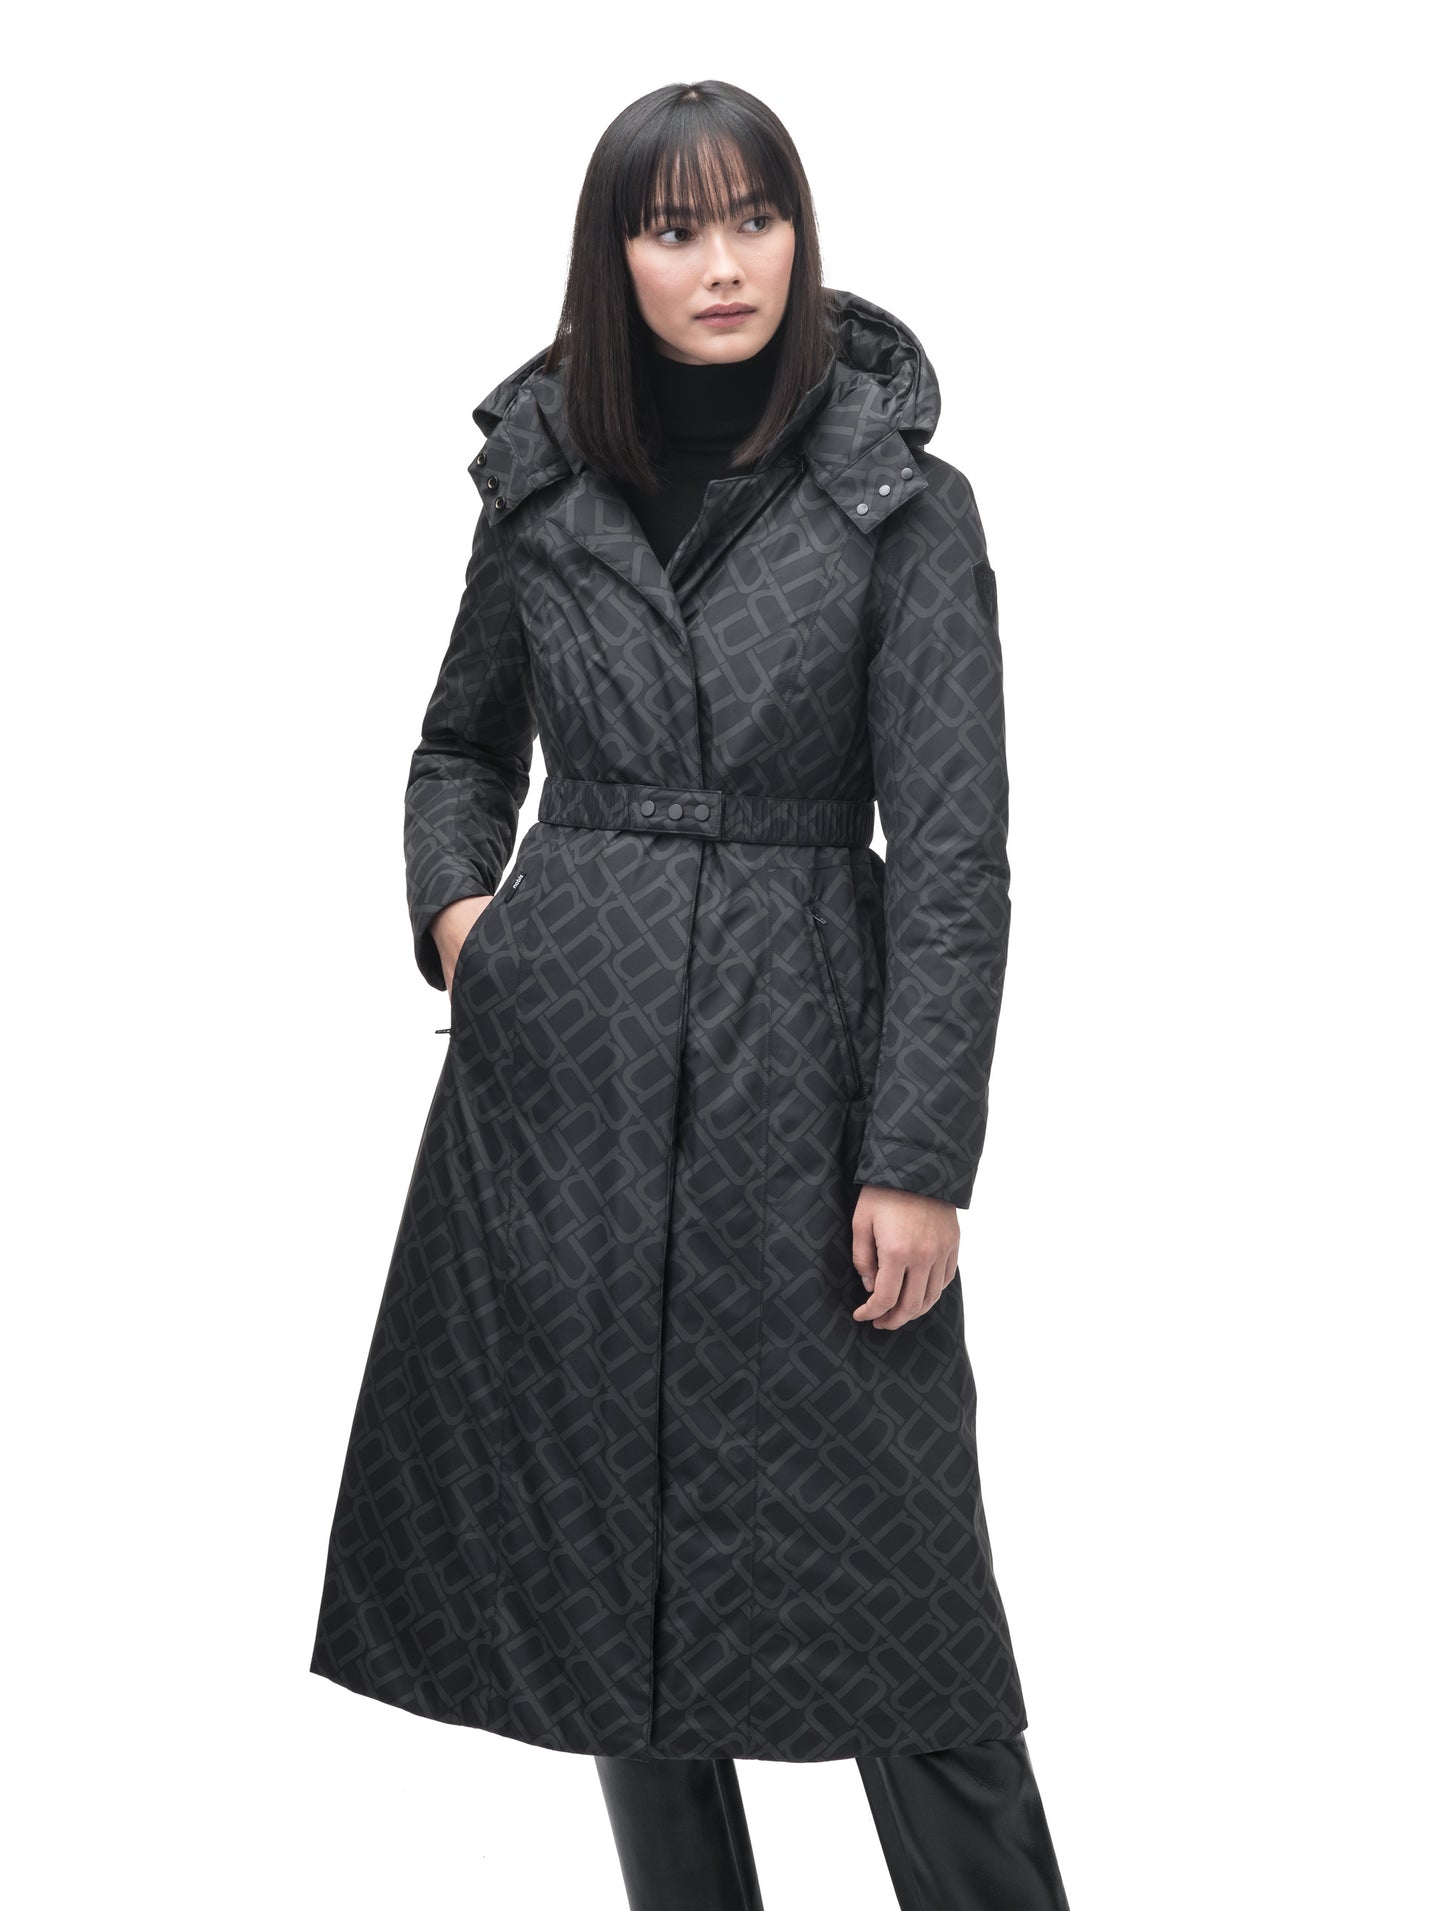 Celest Ladies Duster Parka in knee length, Canadian duck down insulation, removable hood and coyote fur trim, with adjustable belt, in Dark Monogram